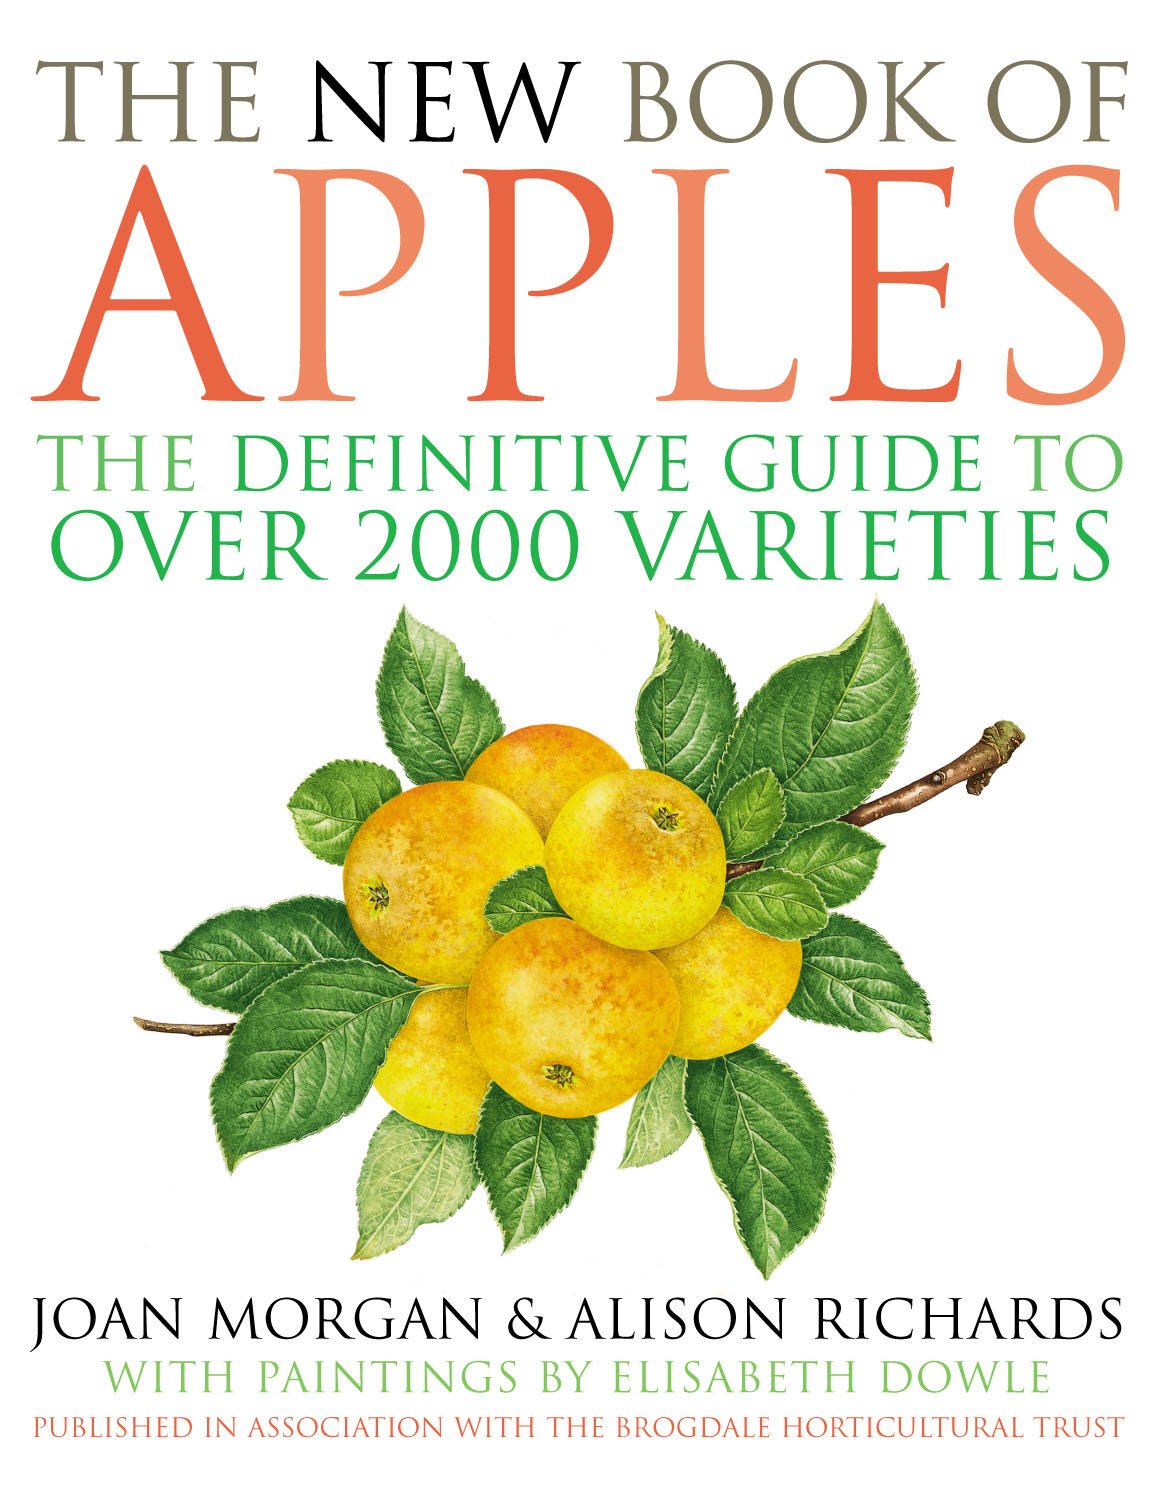 The New Book of Apples: The Definitive Guide to Apples, Including Over 2,000 Varieties by Joan Morgan.